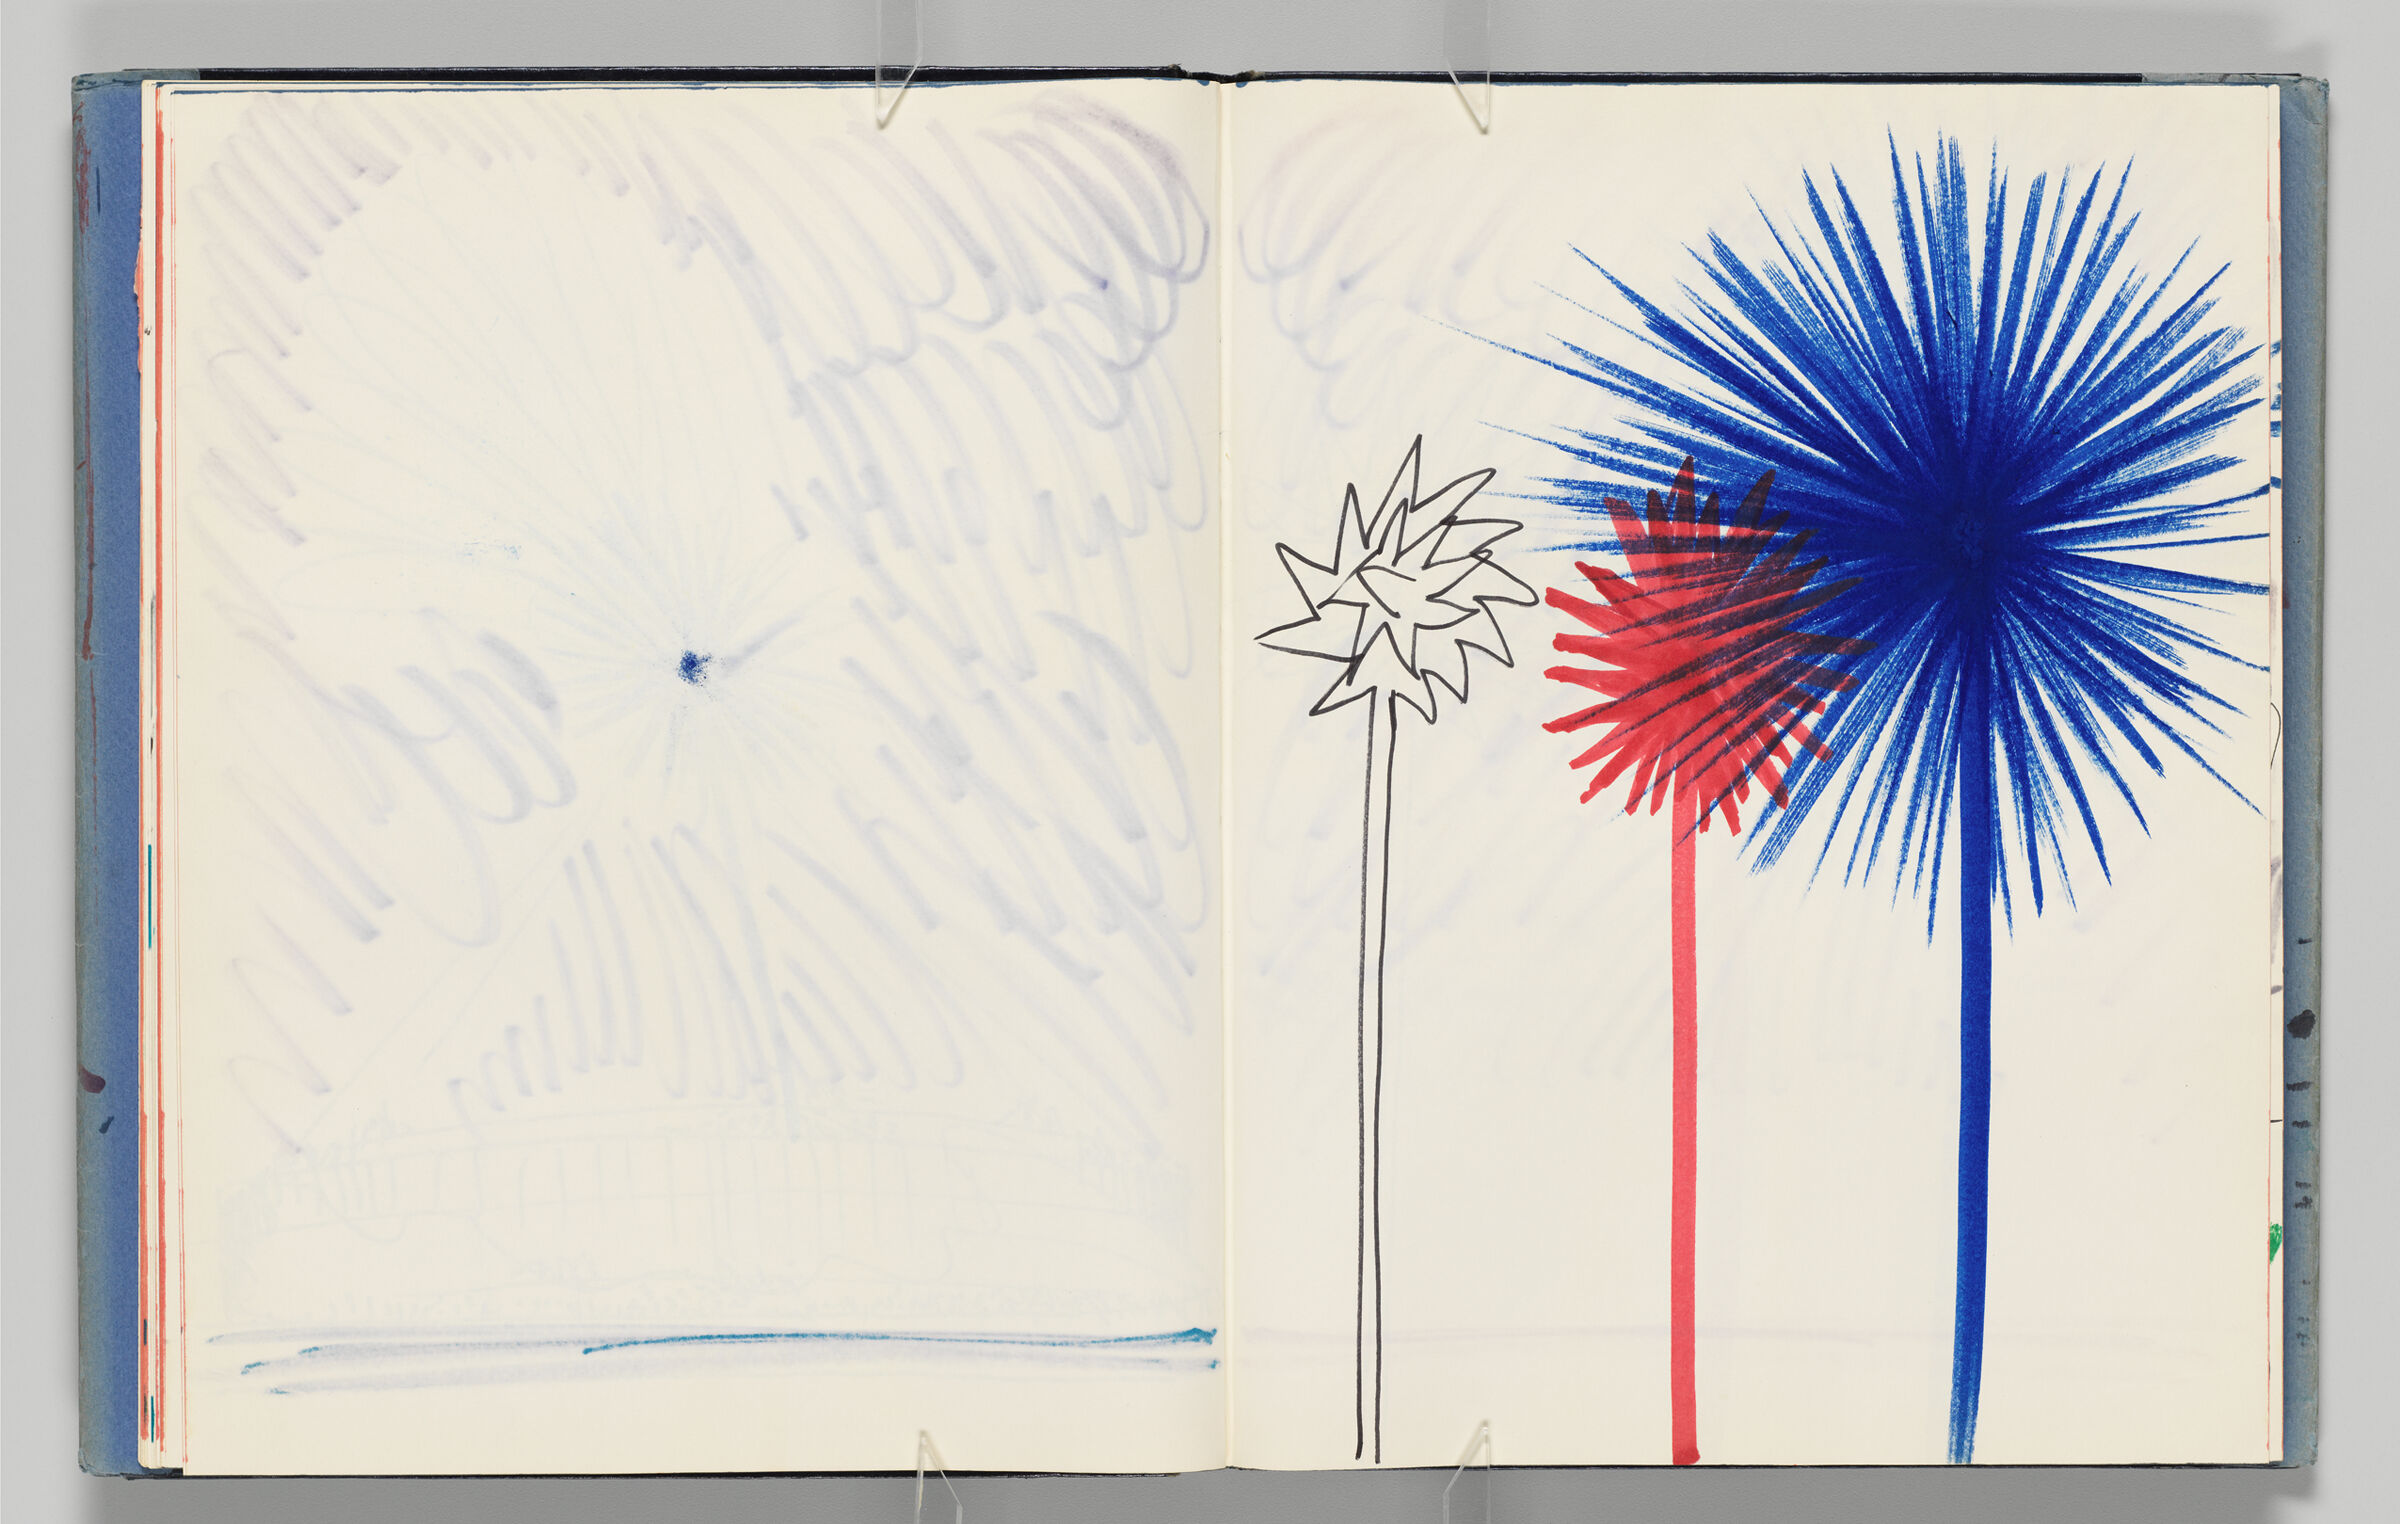 Untitled (Bleed-Through Of Previous Page, Left Page); Untitled (Designs For Inflatable Sculptures, Right Page)